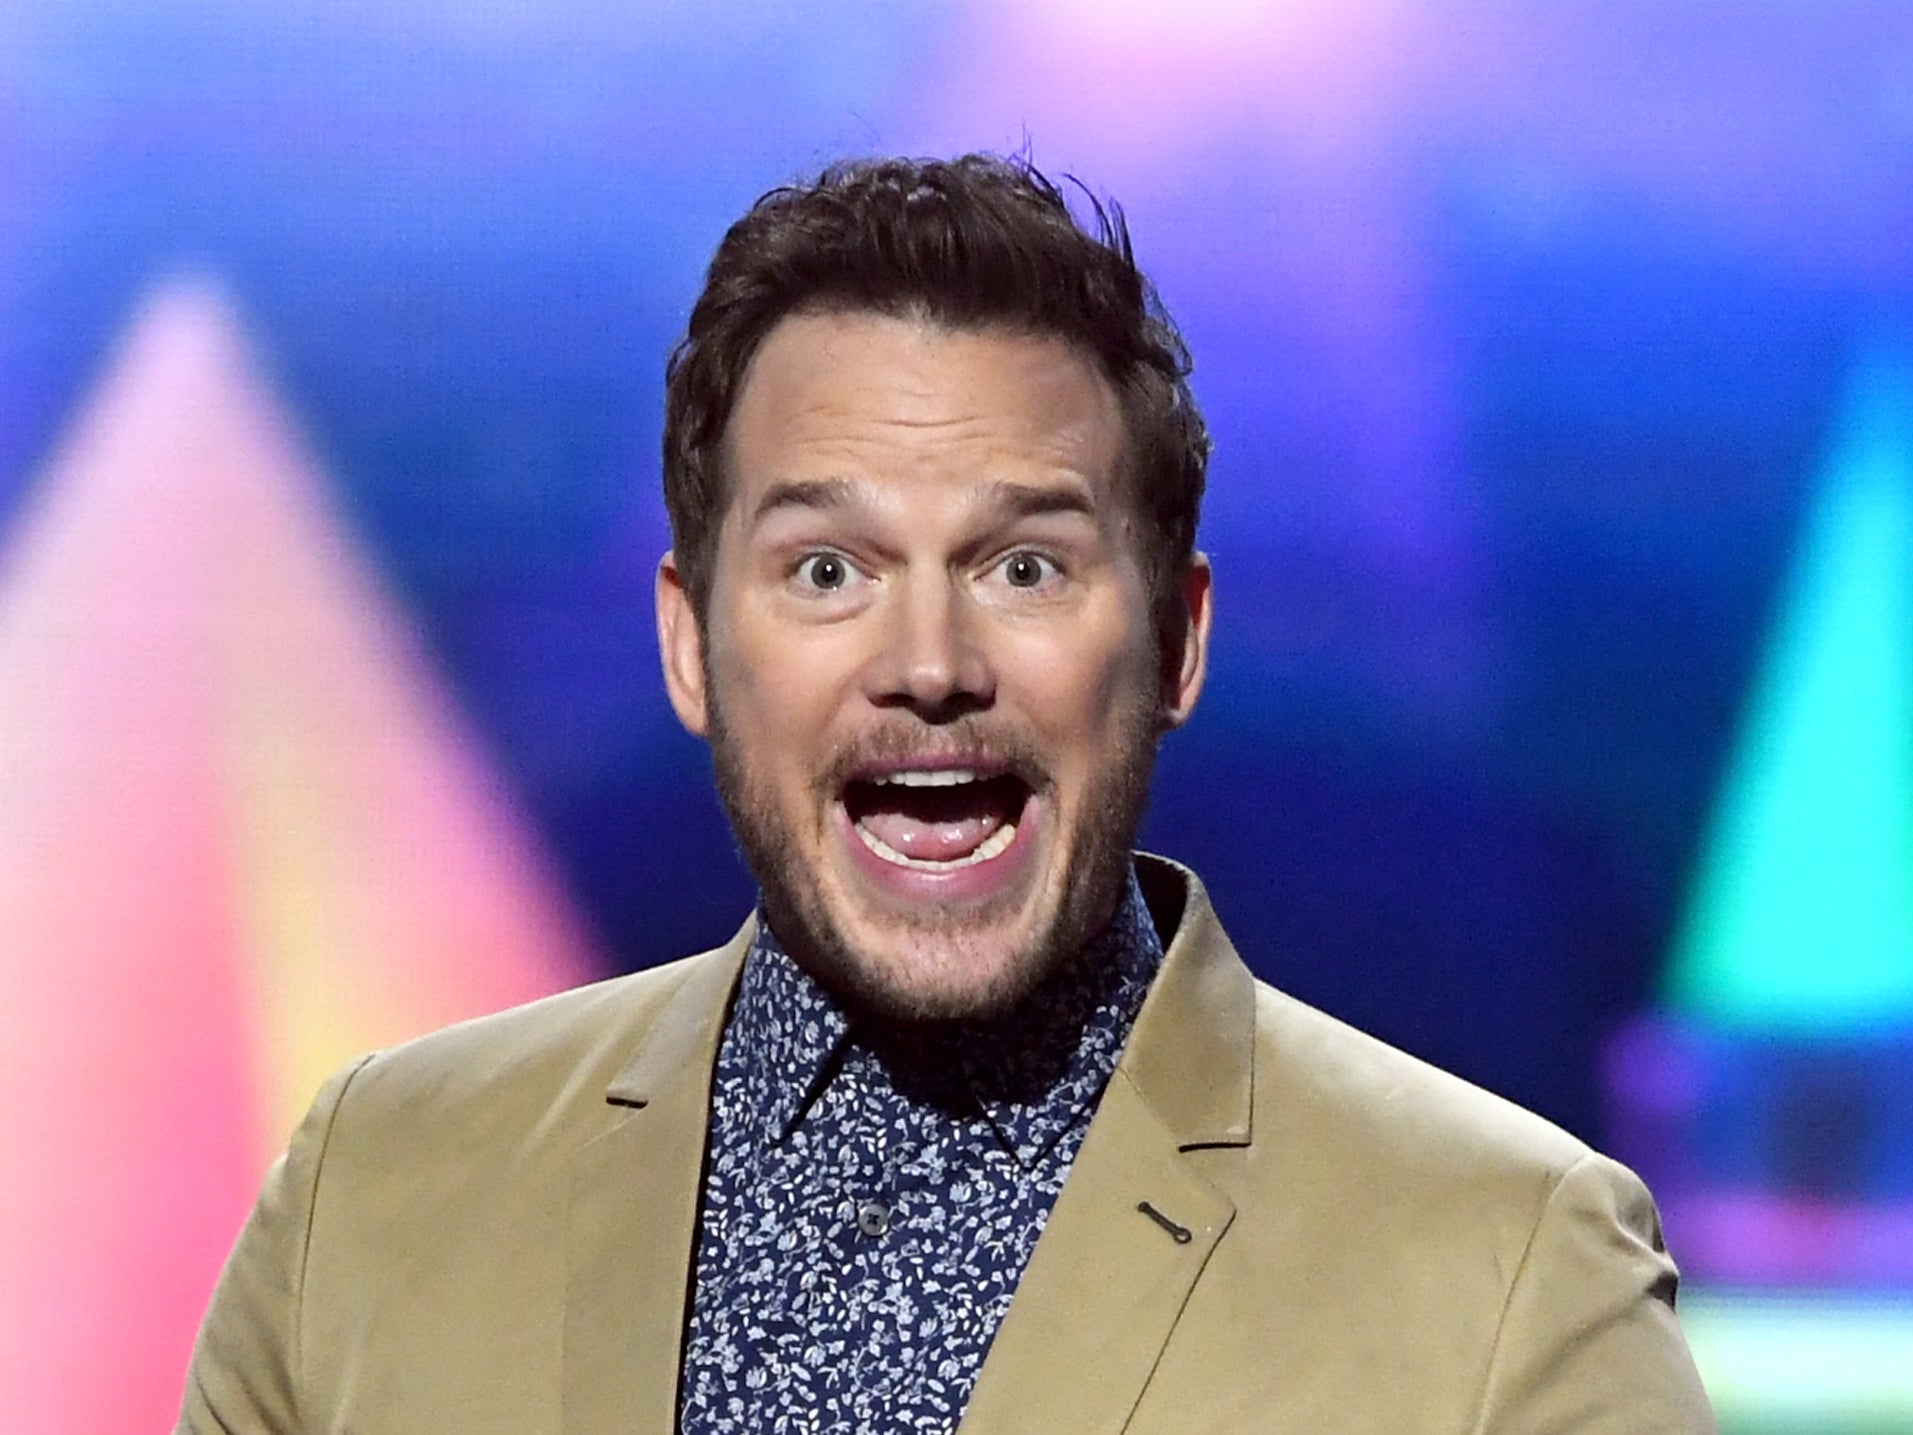 Through roles in the Jurassic World films and the Marvel franchise, Chris Pratt has risen to become one of our most prominent movie stars